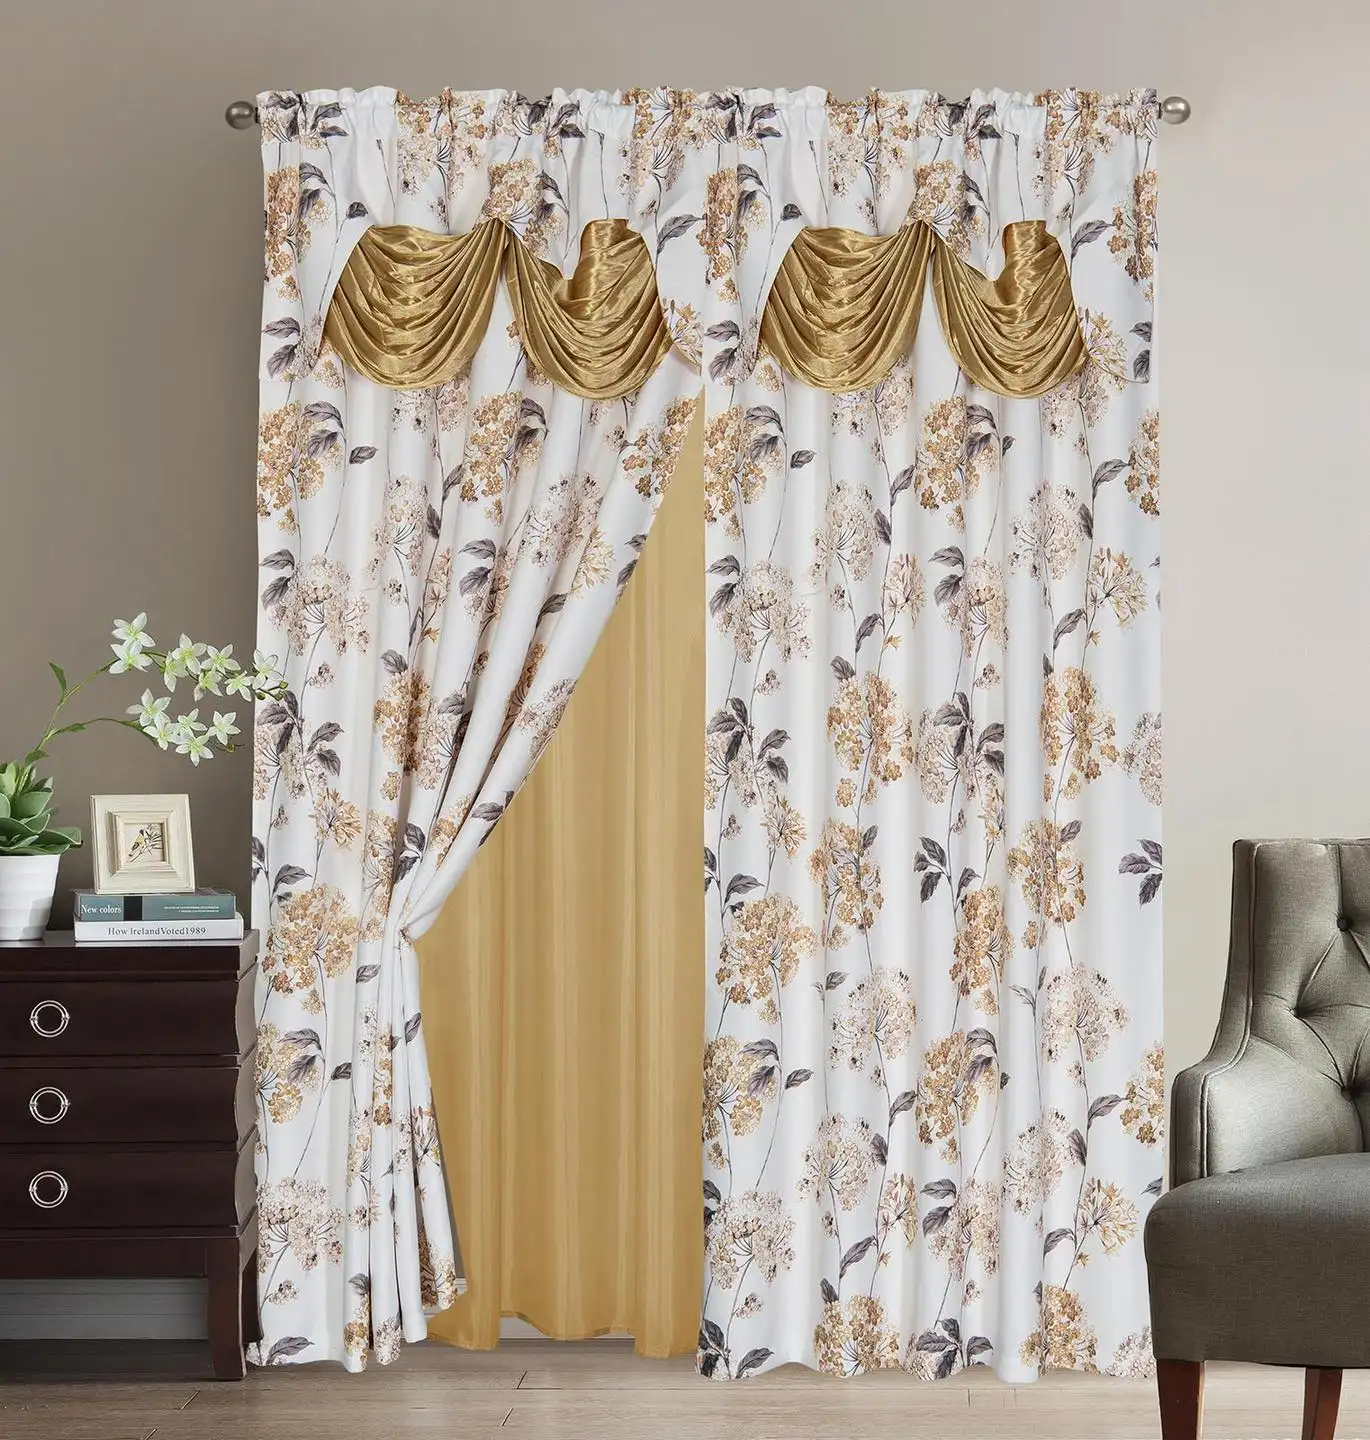 LUXURY WINDOW CURTAINS DOUBLE SIDE WITH VALANCE EMBROIDERY BLACKOUT CURTAINS Cross border hot sale